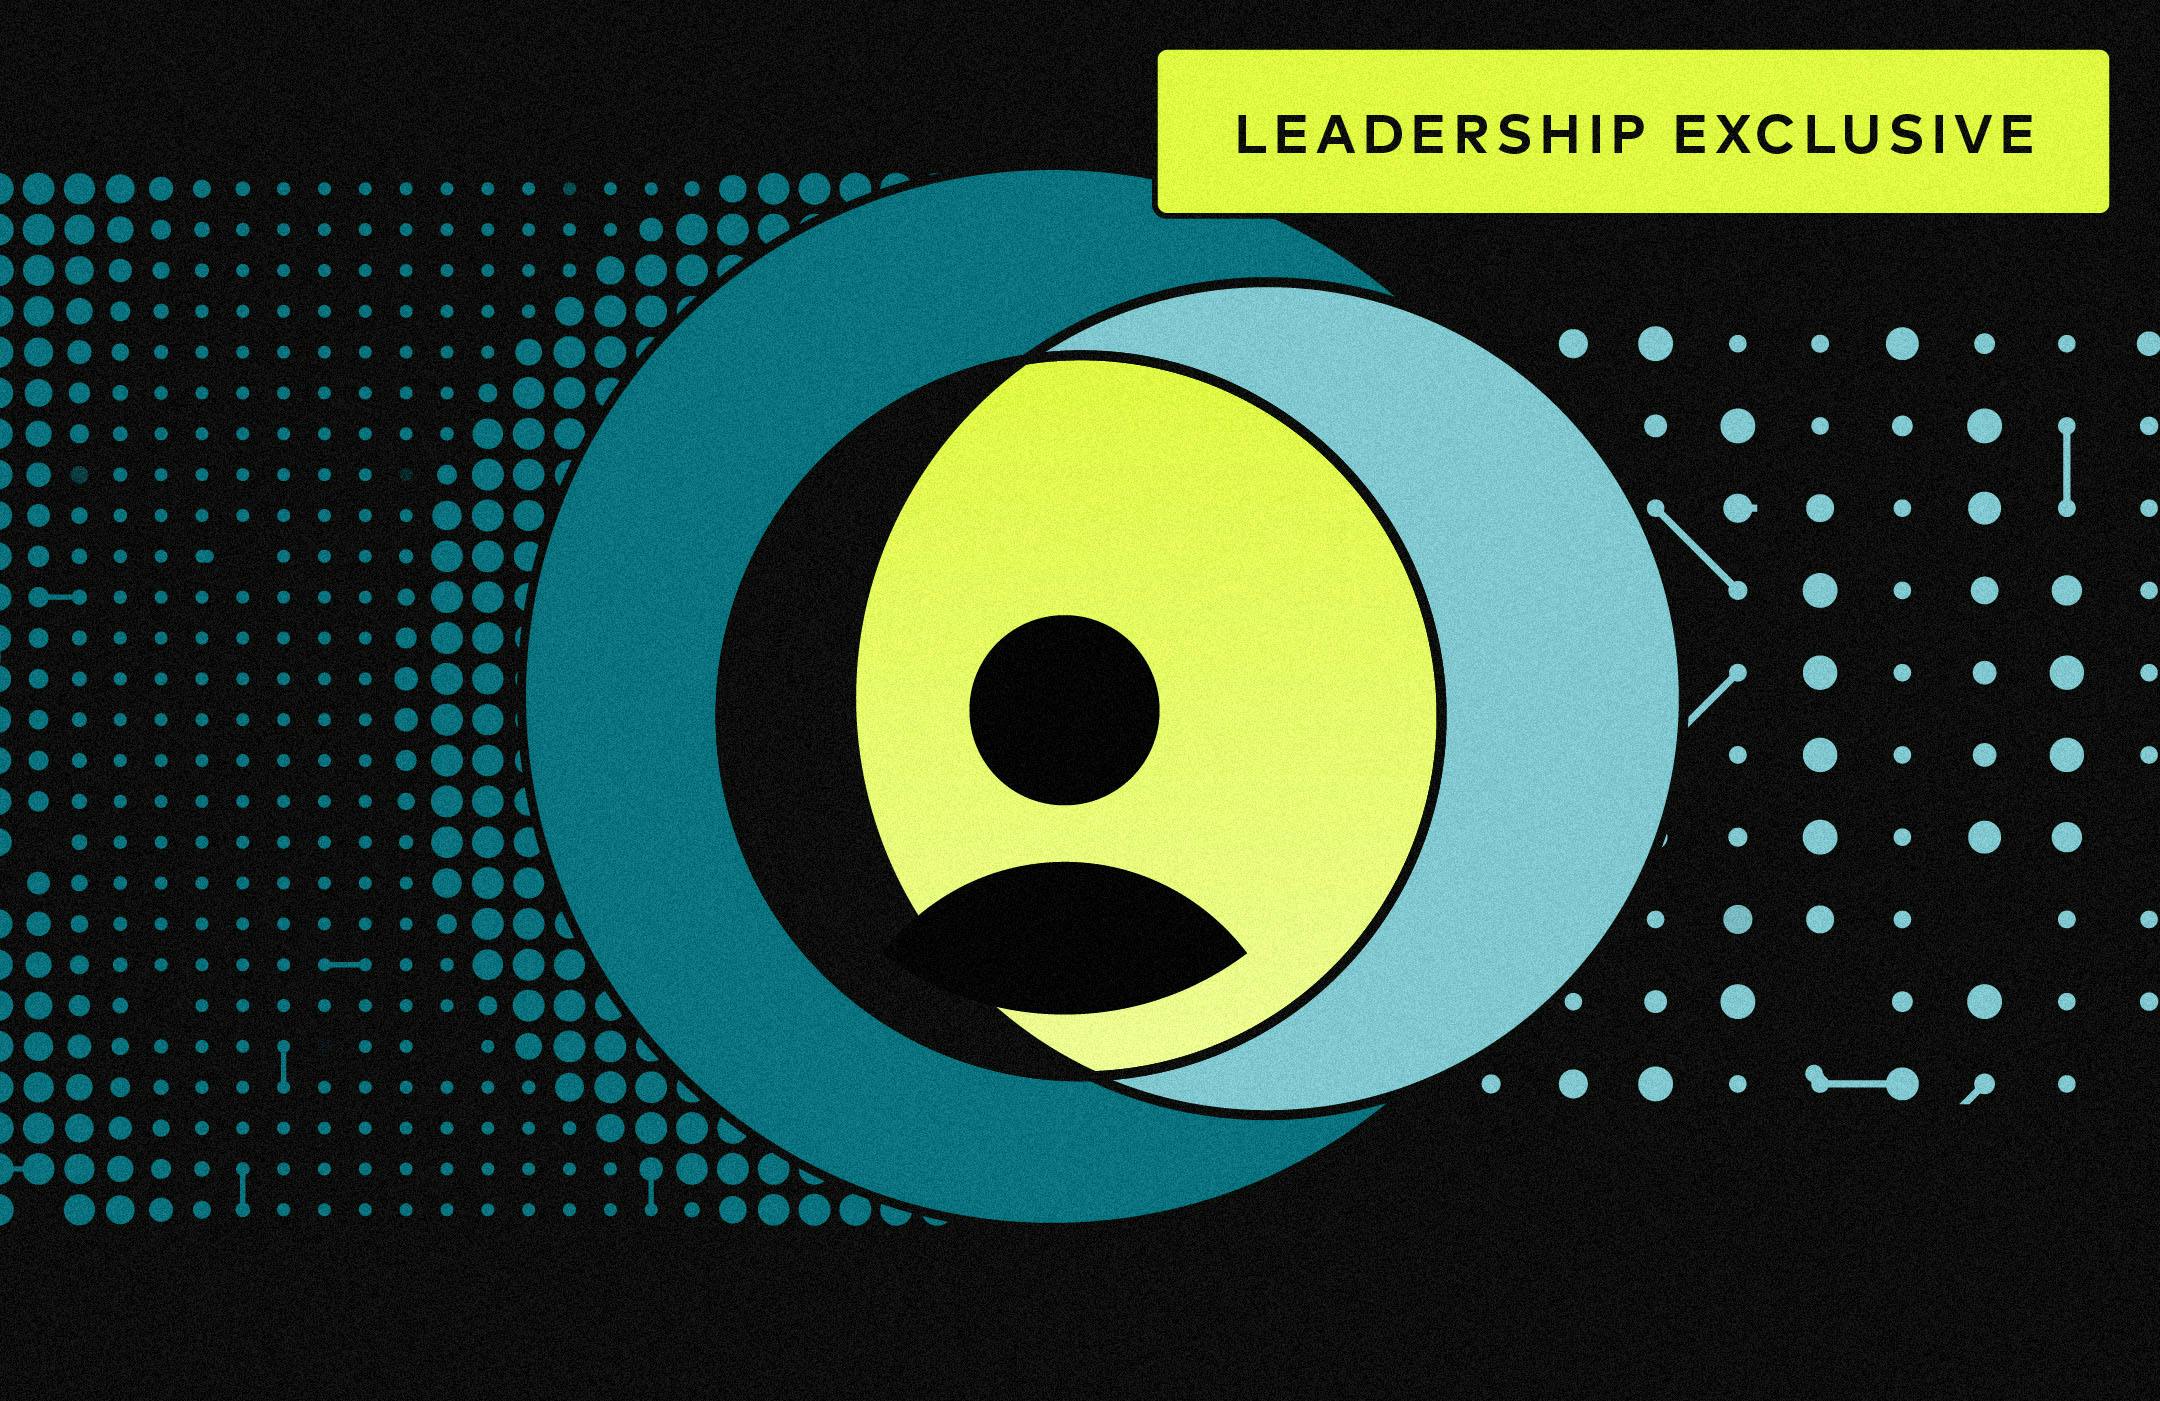 Illustration of user icon in overlapping yellow and blue circles, with tag "Leadership Exclusive"